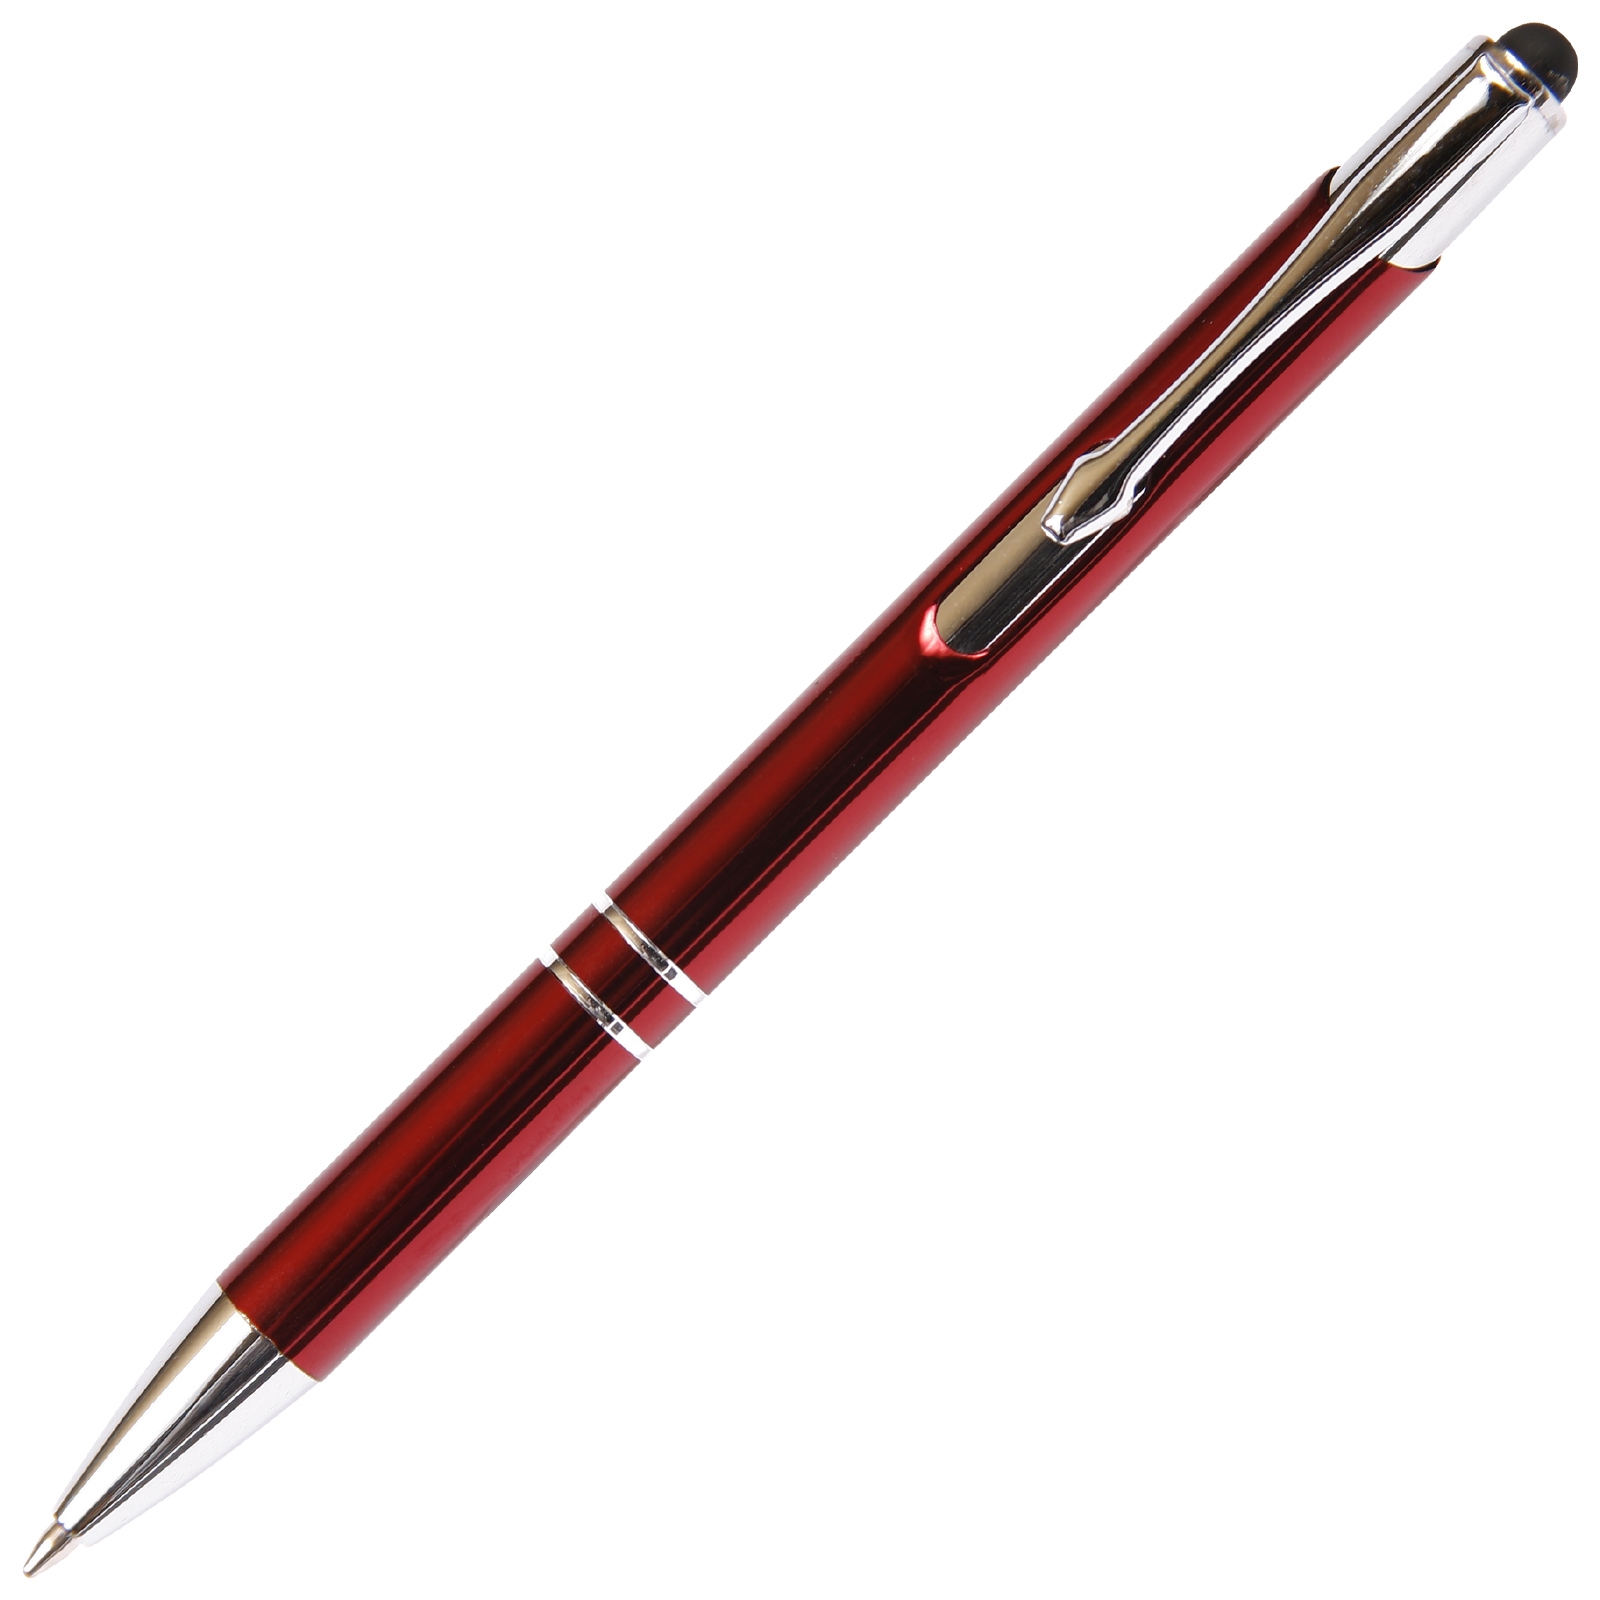 Budget Friendly Stylus JJ Ballpoint Pen - Red with Medium Tip Point By Lanier Pens